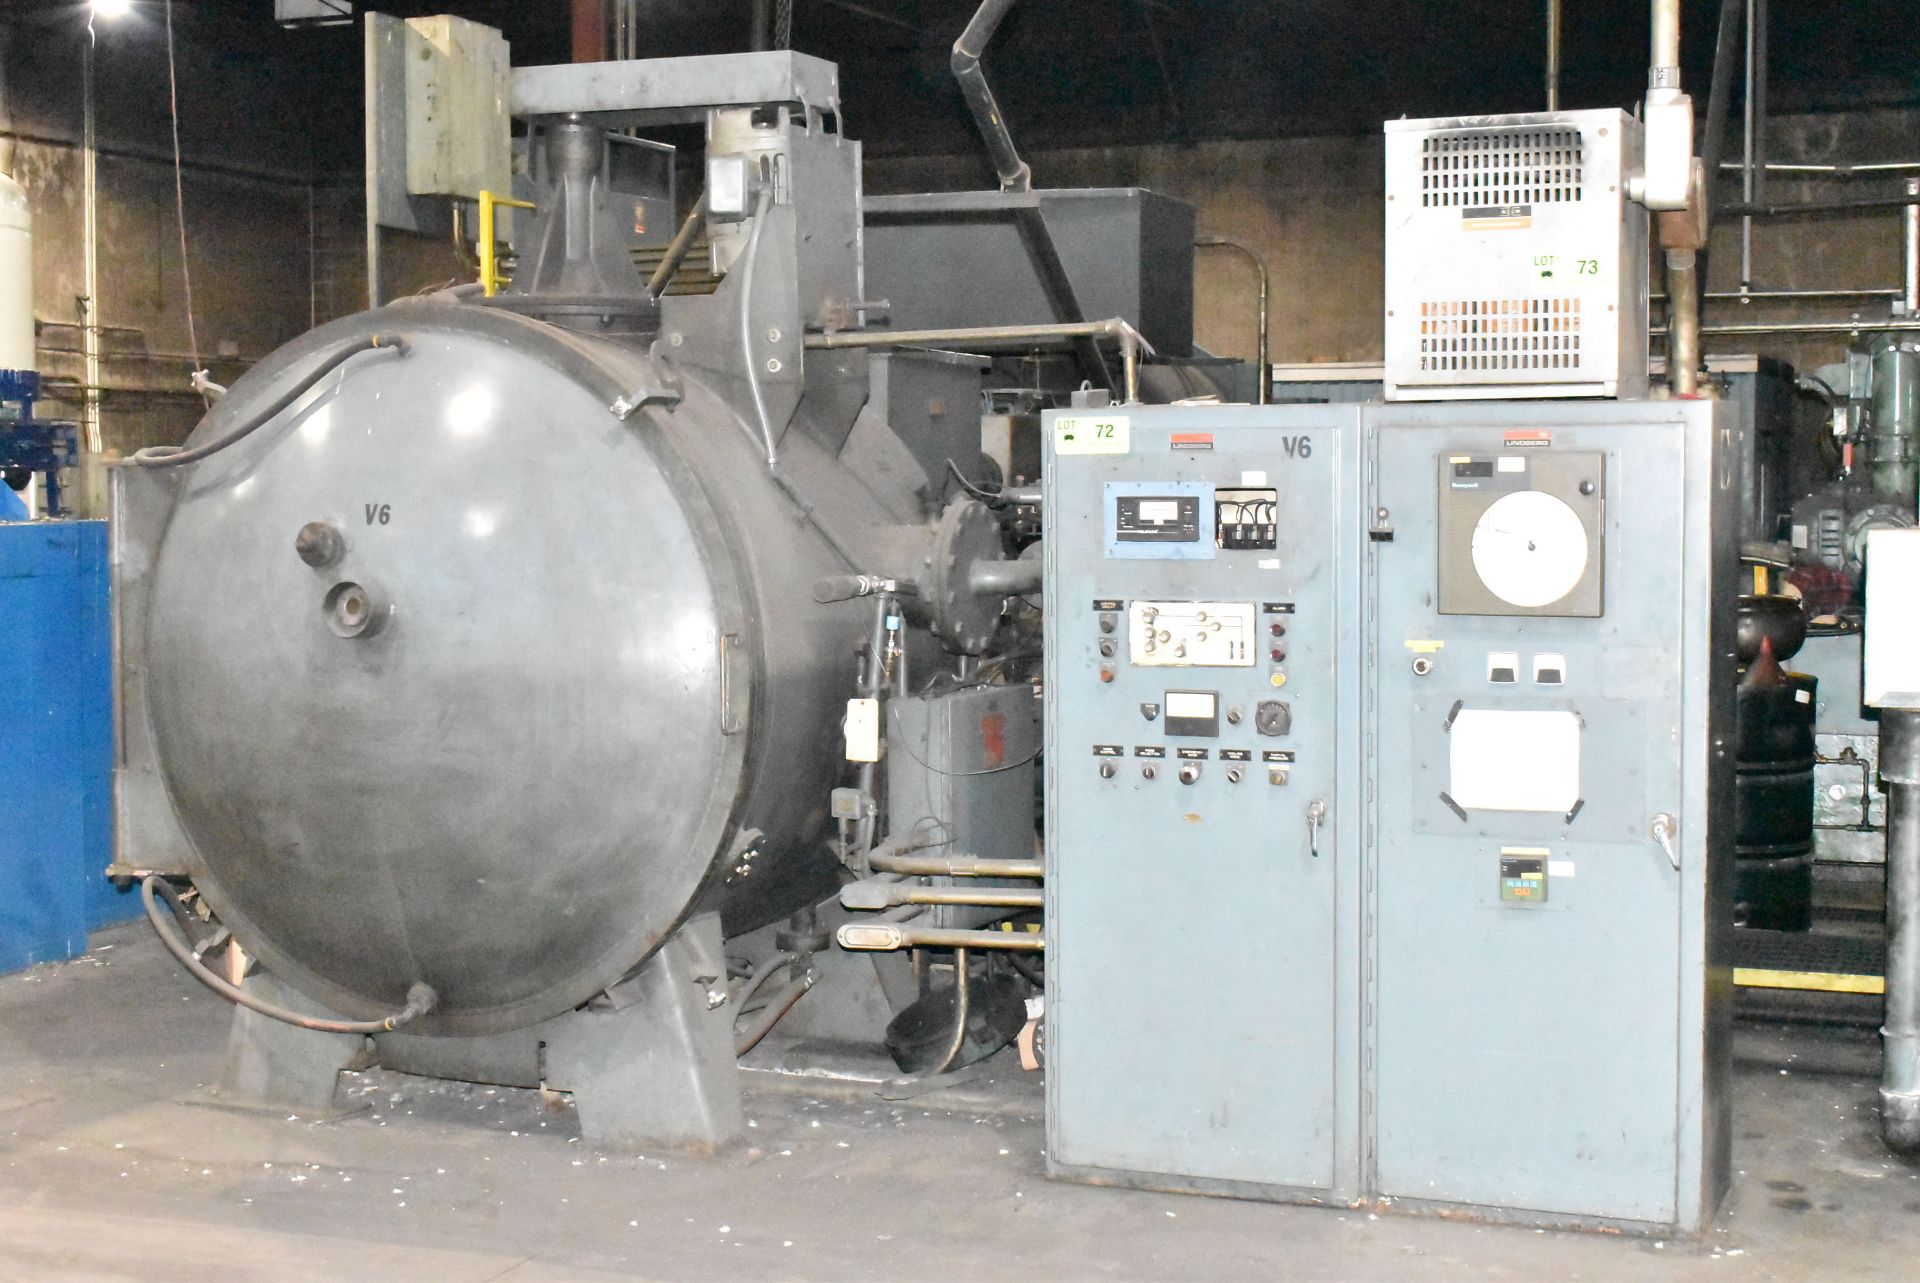 LINDBERG 21-GR-243618-21T ELECTRIC VACUUM FURNACE WITH 2,100 DEGREES F MAX TEMP, 24"Wx18"Hx36"D - Image 2 of 13